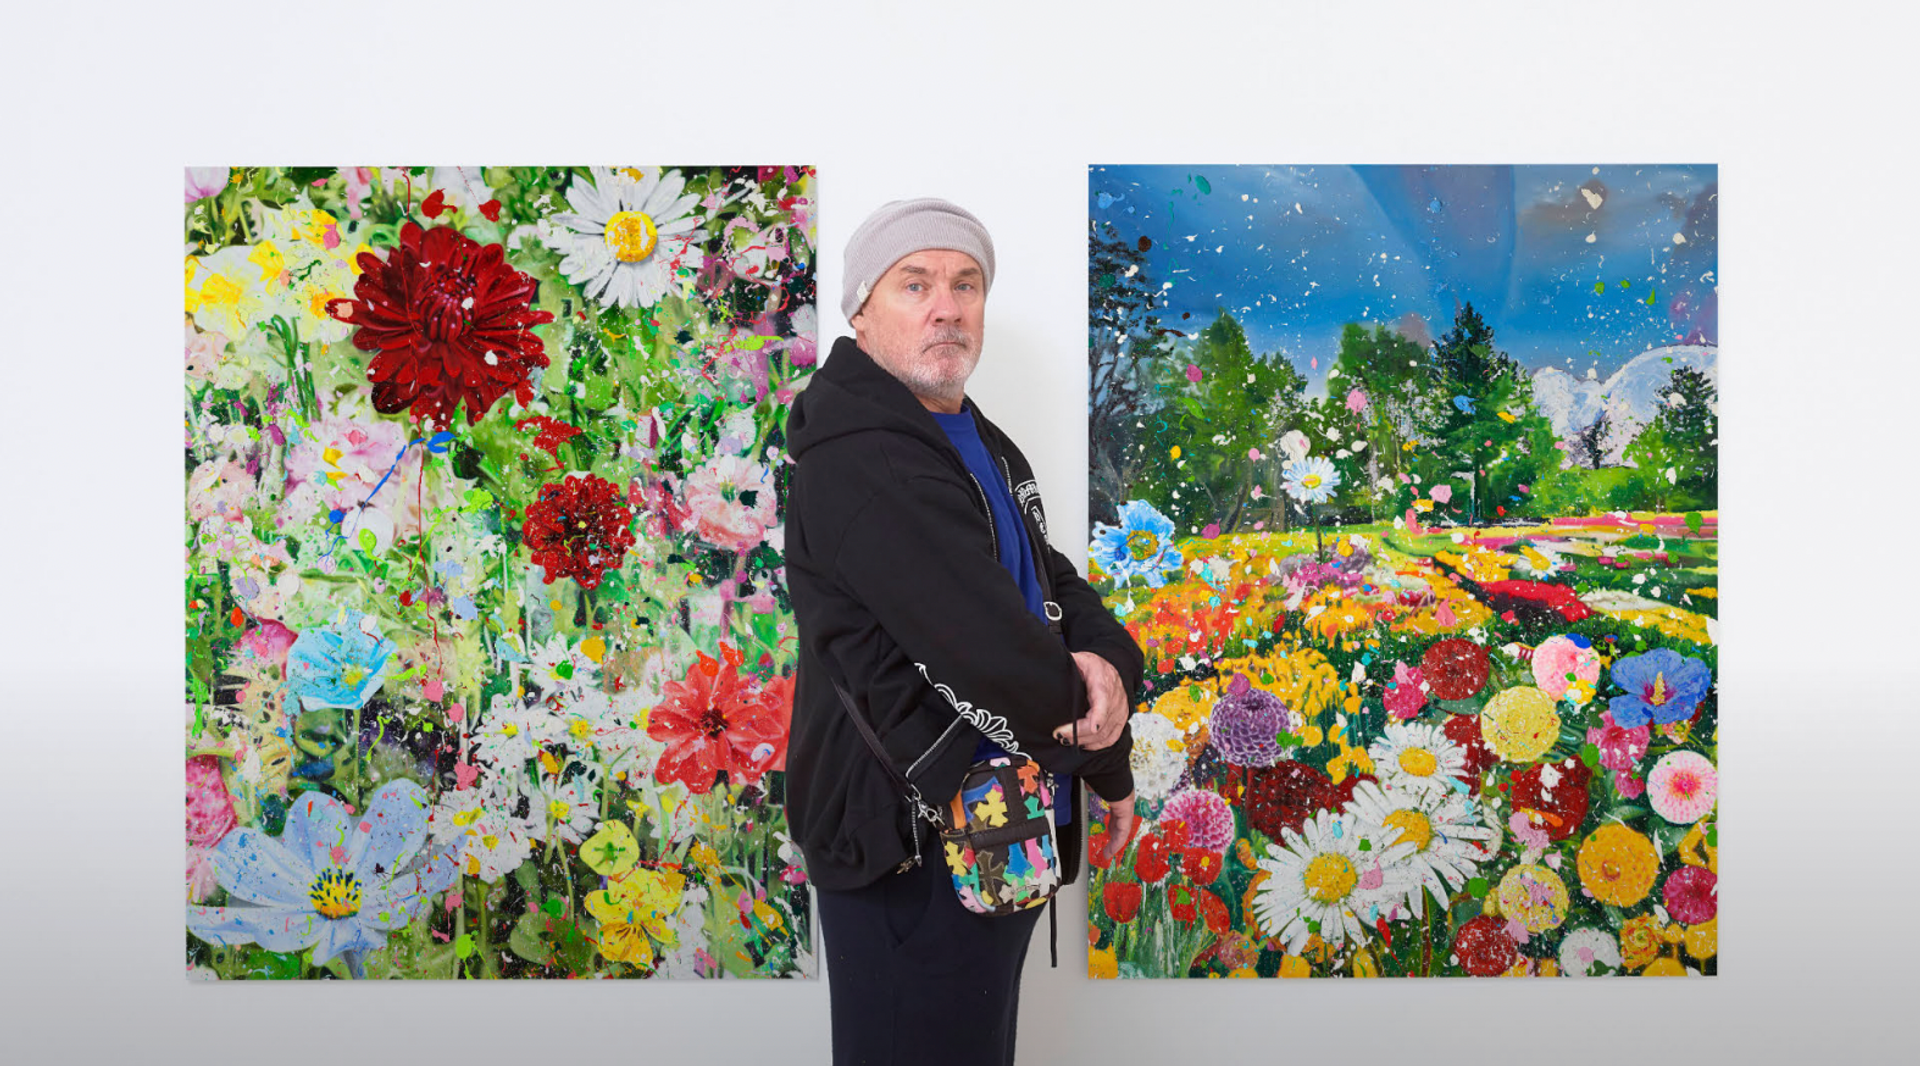 A photograph of Damien Hirst in a tracksuit standing in front of two of his The Secrets prints, which depict a colourful compositions of flowers in a field.